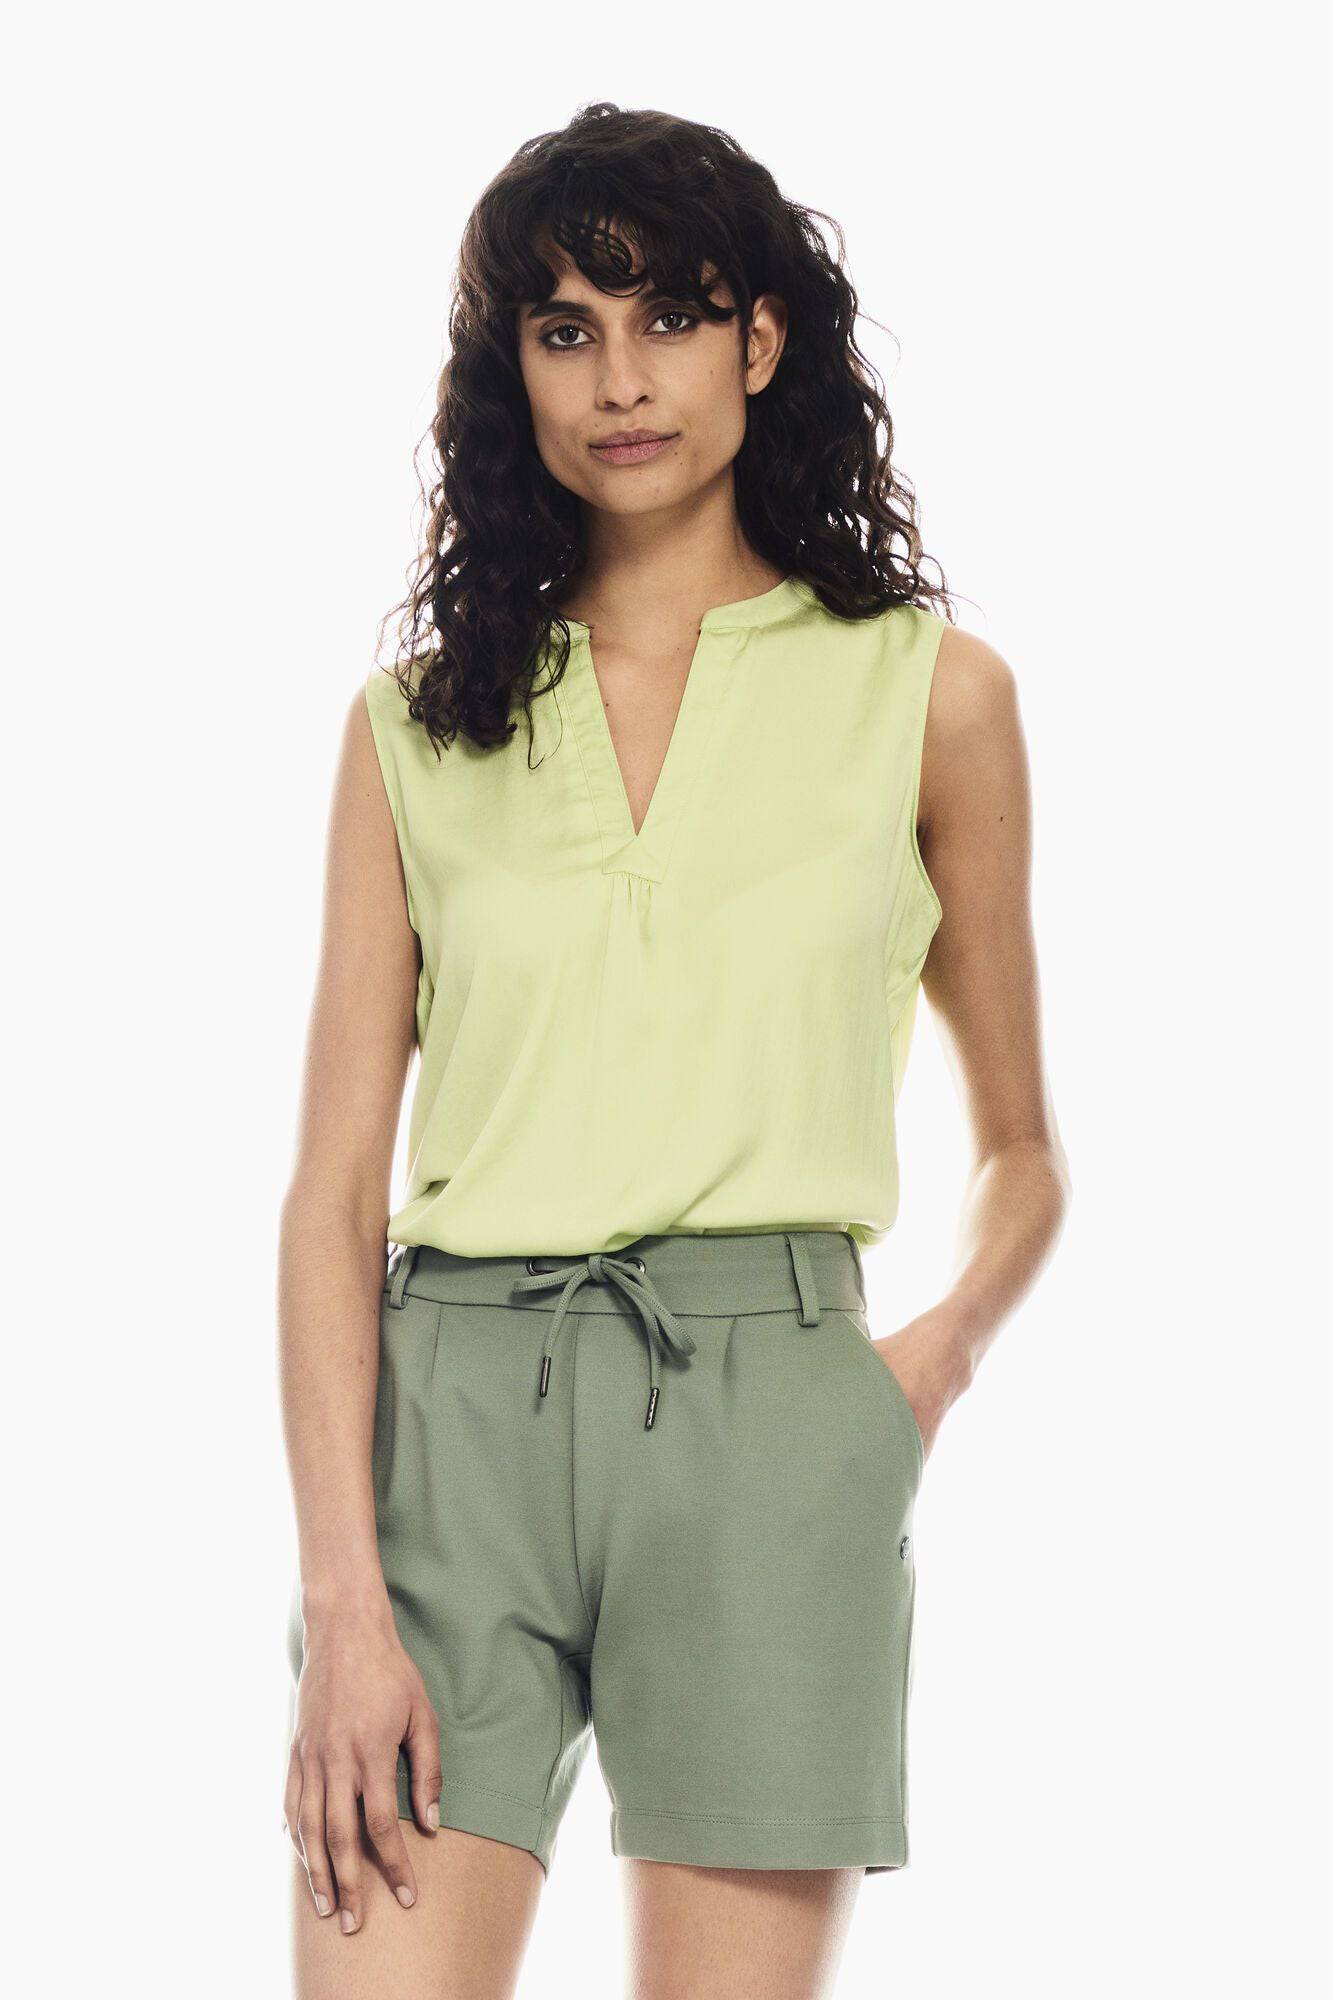 Sleeveless Garcia Pistache Shirt - Your Style Your Story